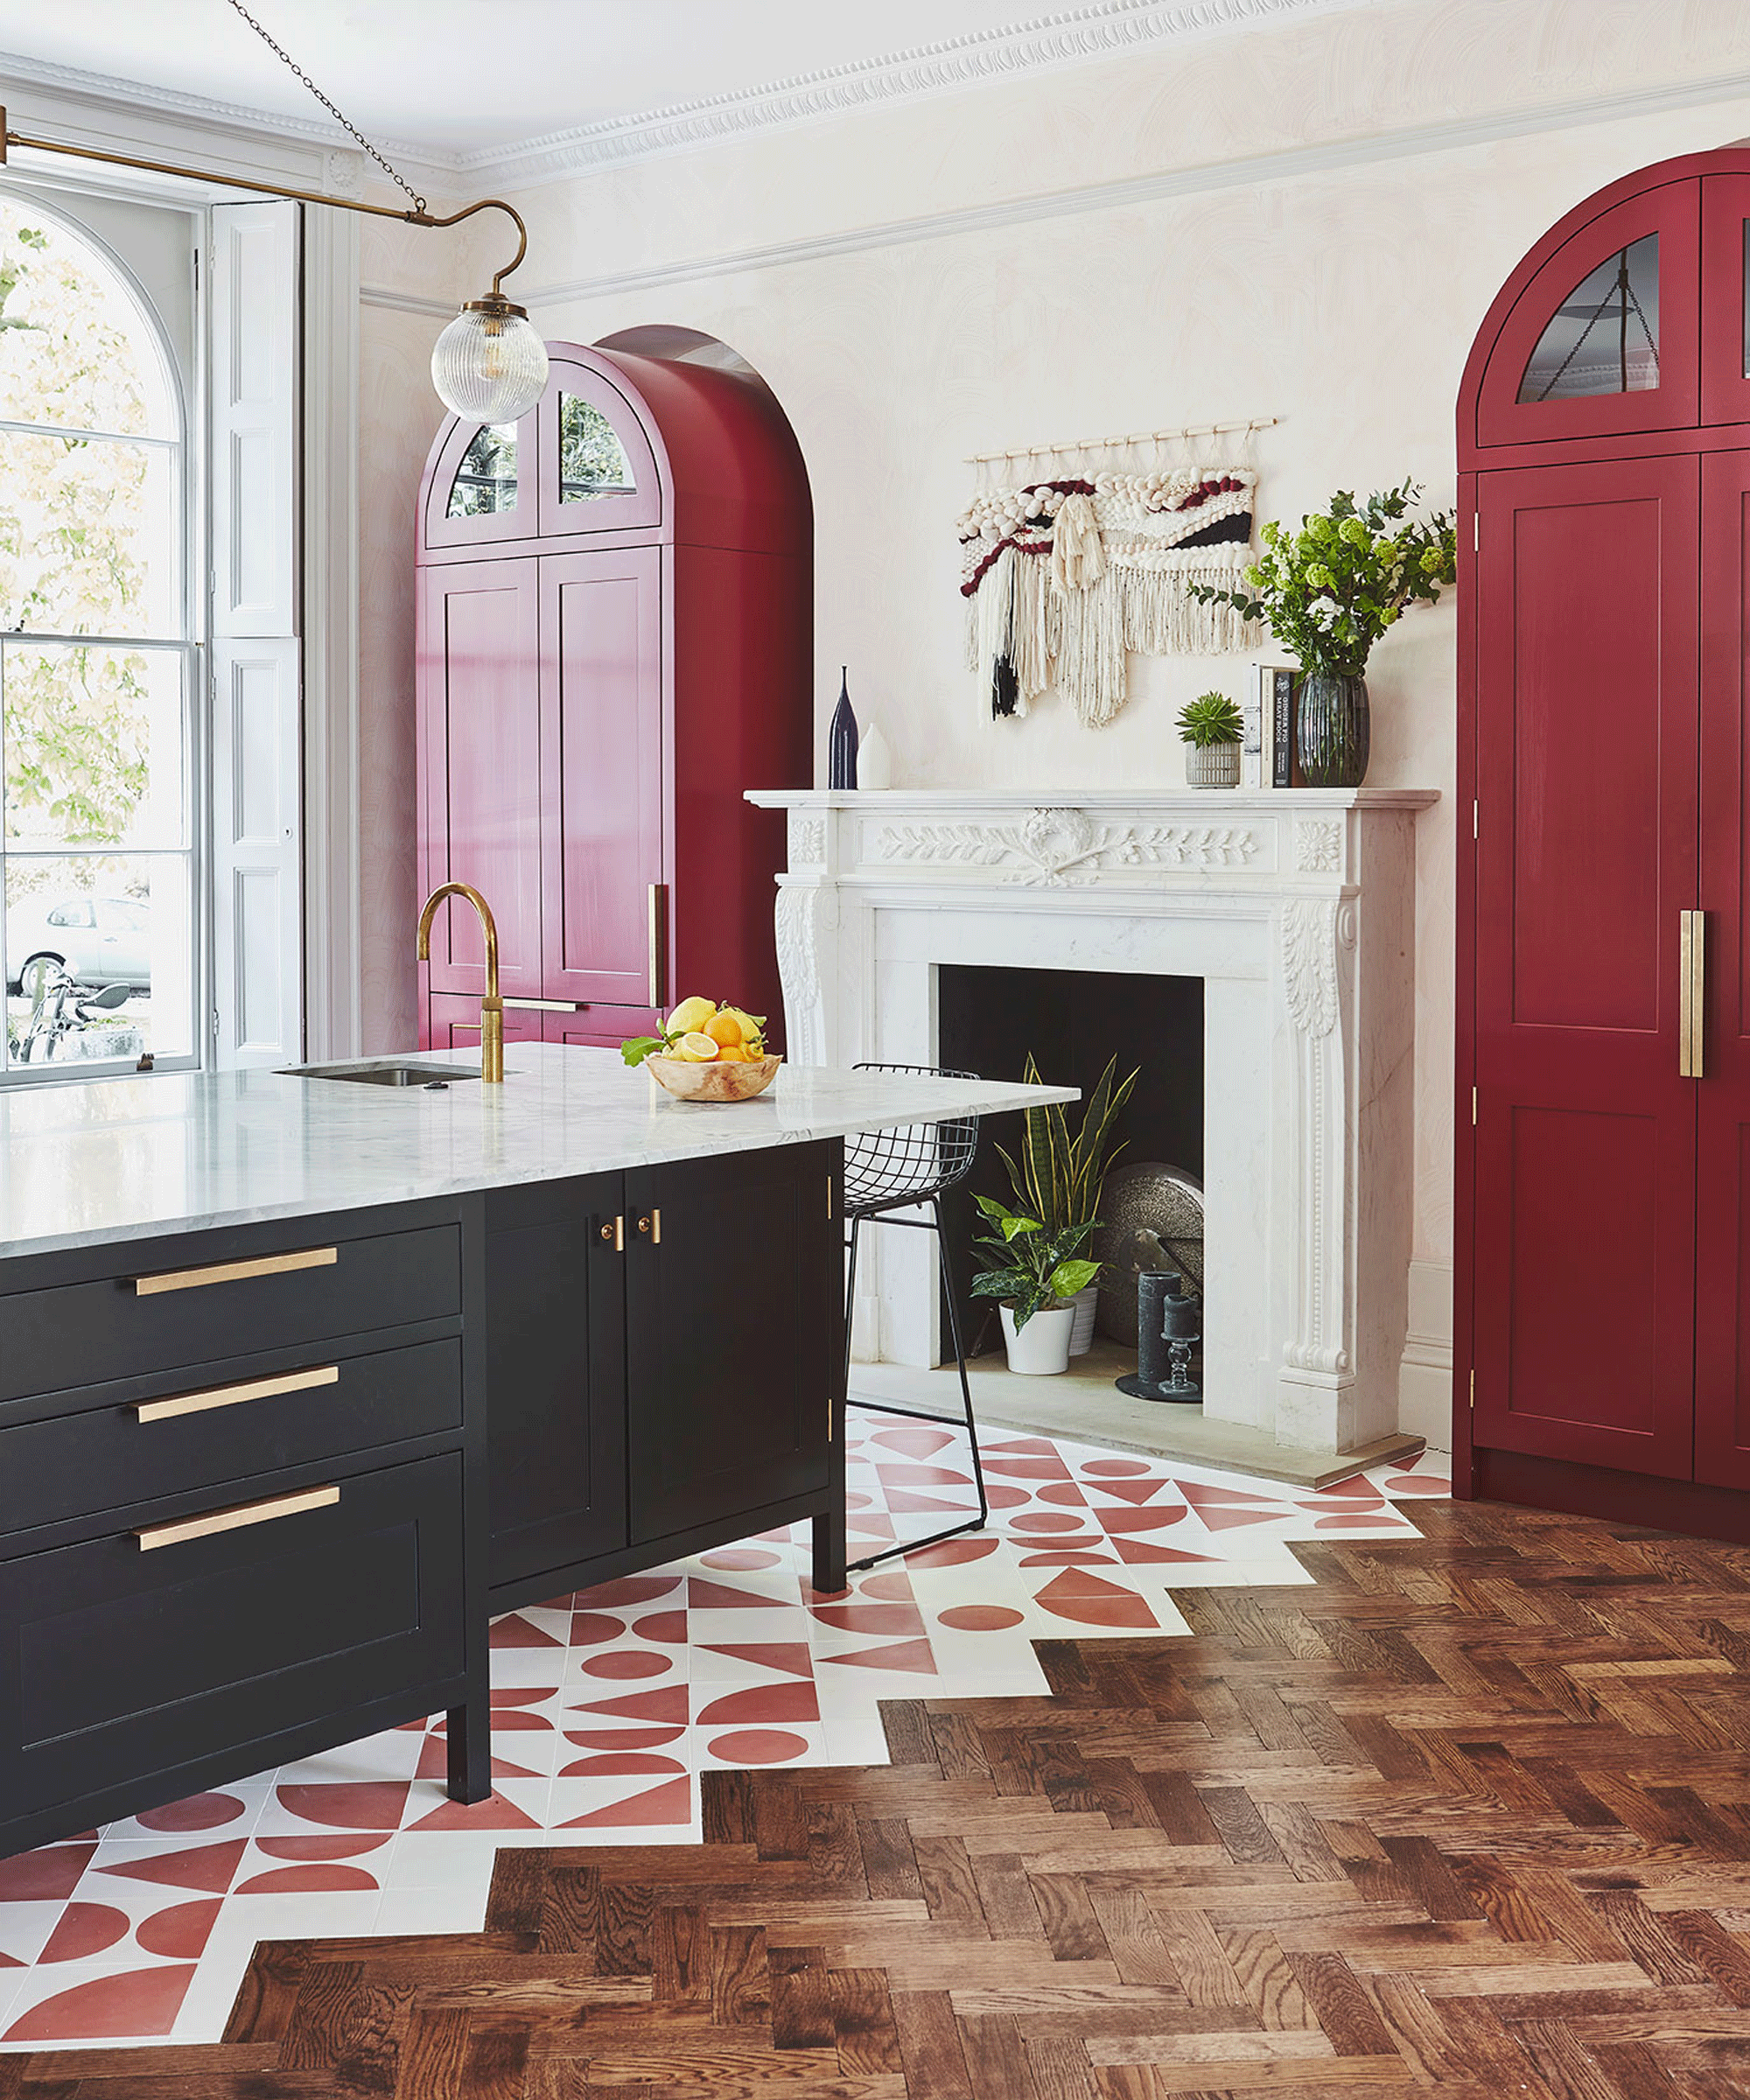 Open plan kitchen with red and white tiled zig zag floors